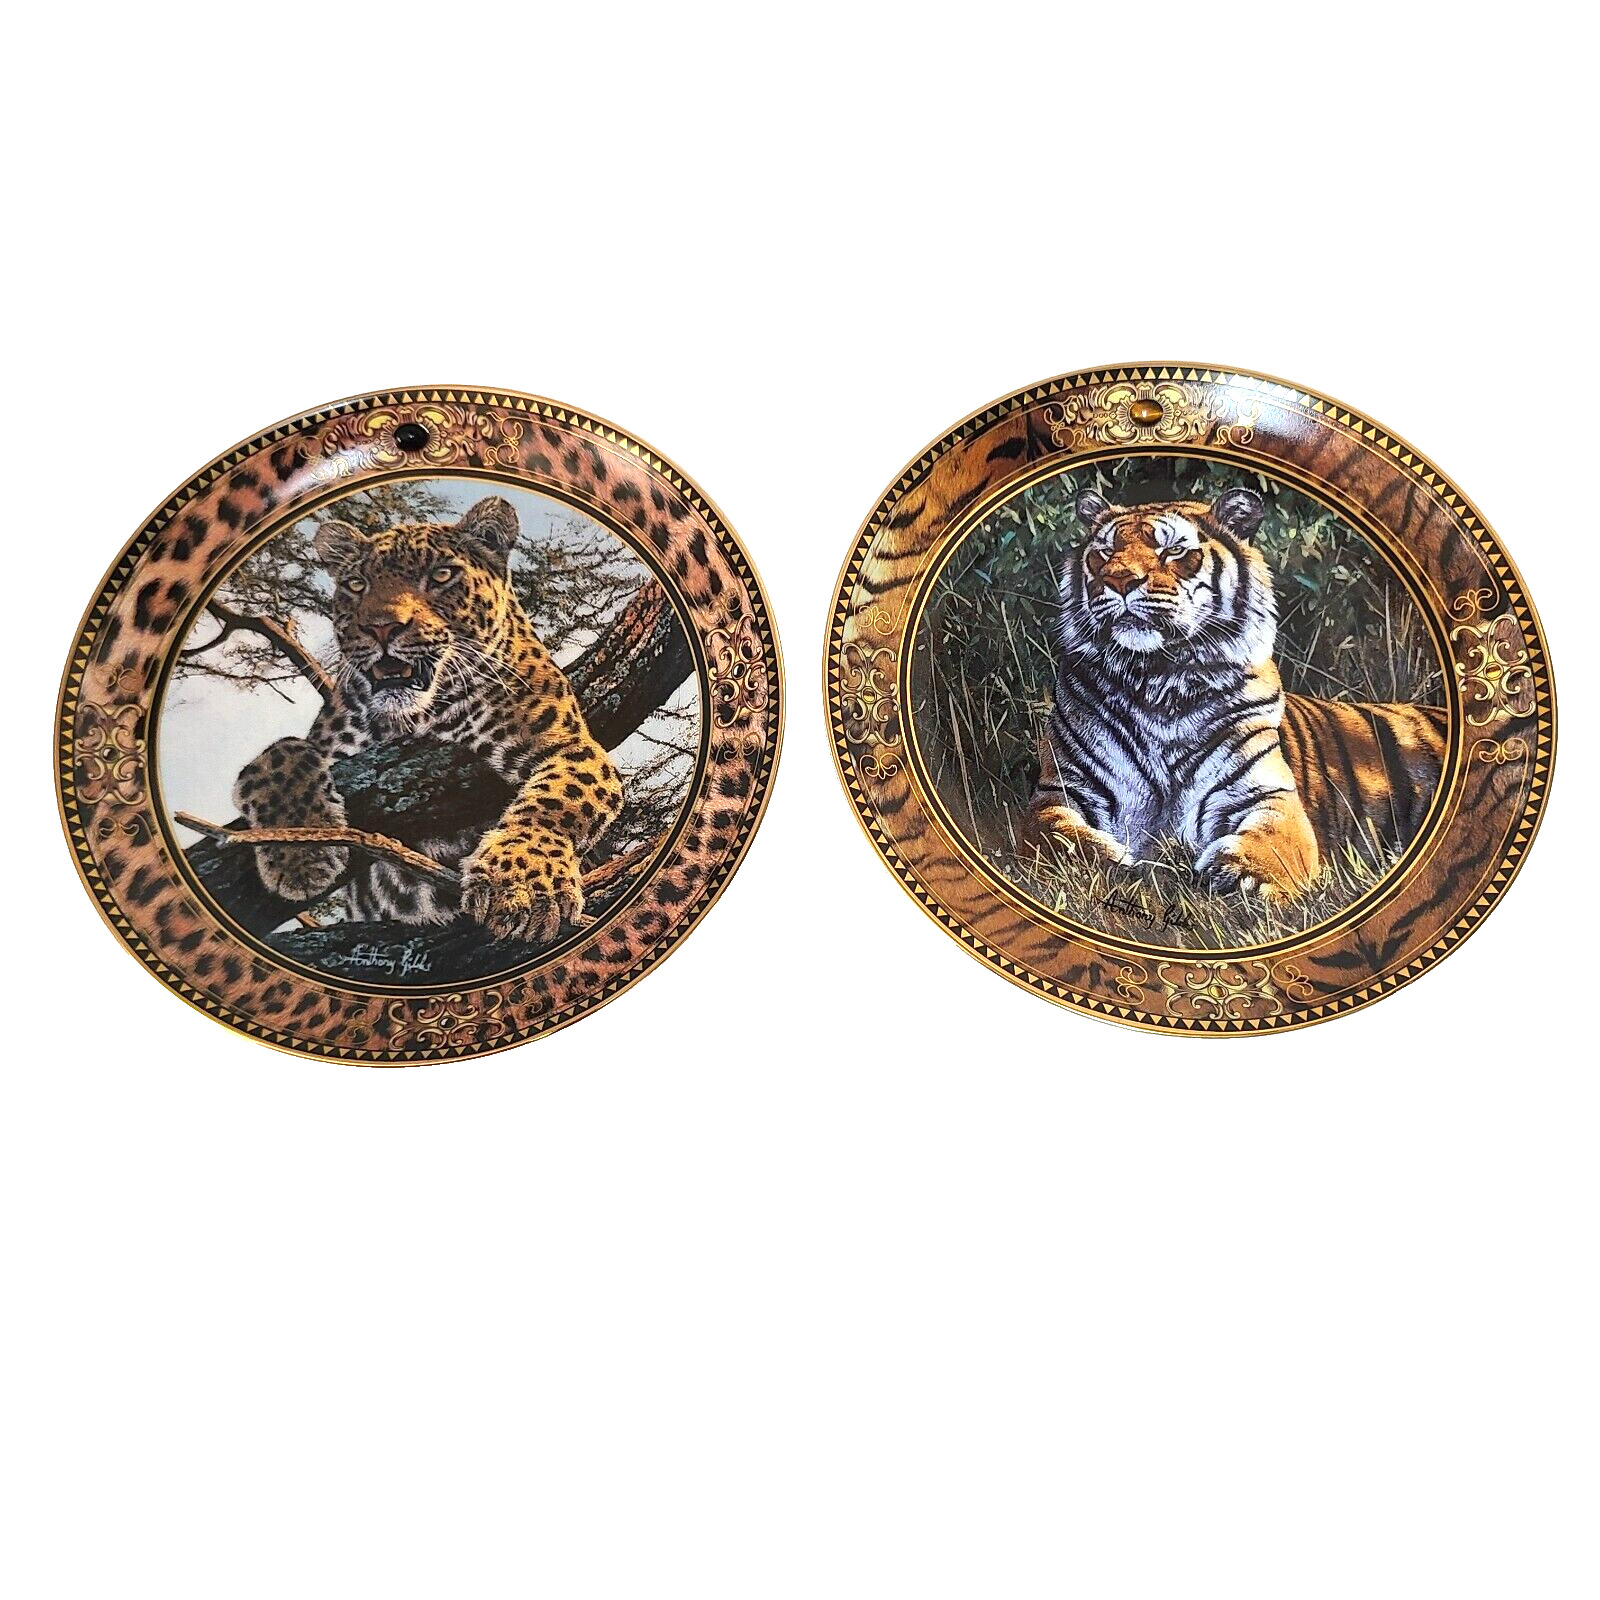 Franklin Mint Heirloom plates, Set 2, Lure Of The Leopard, Treasure of the Tiger